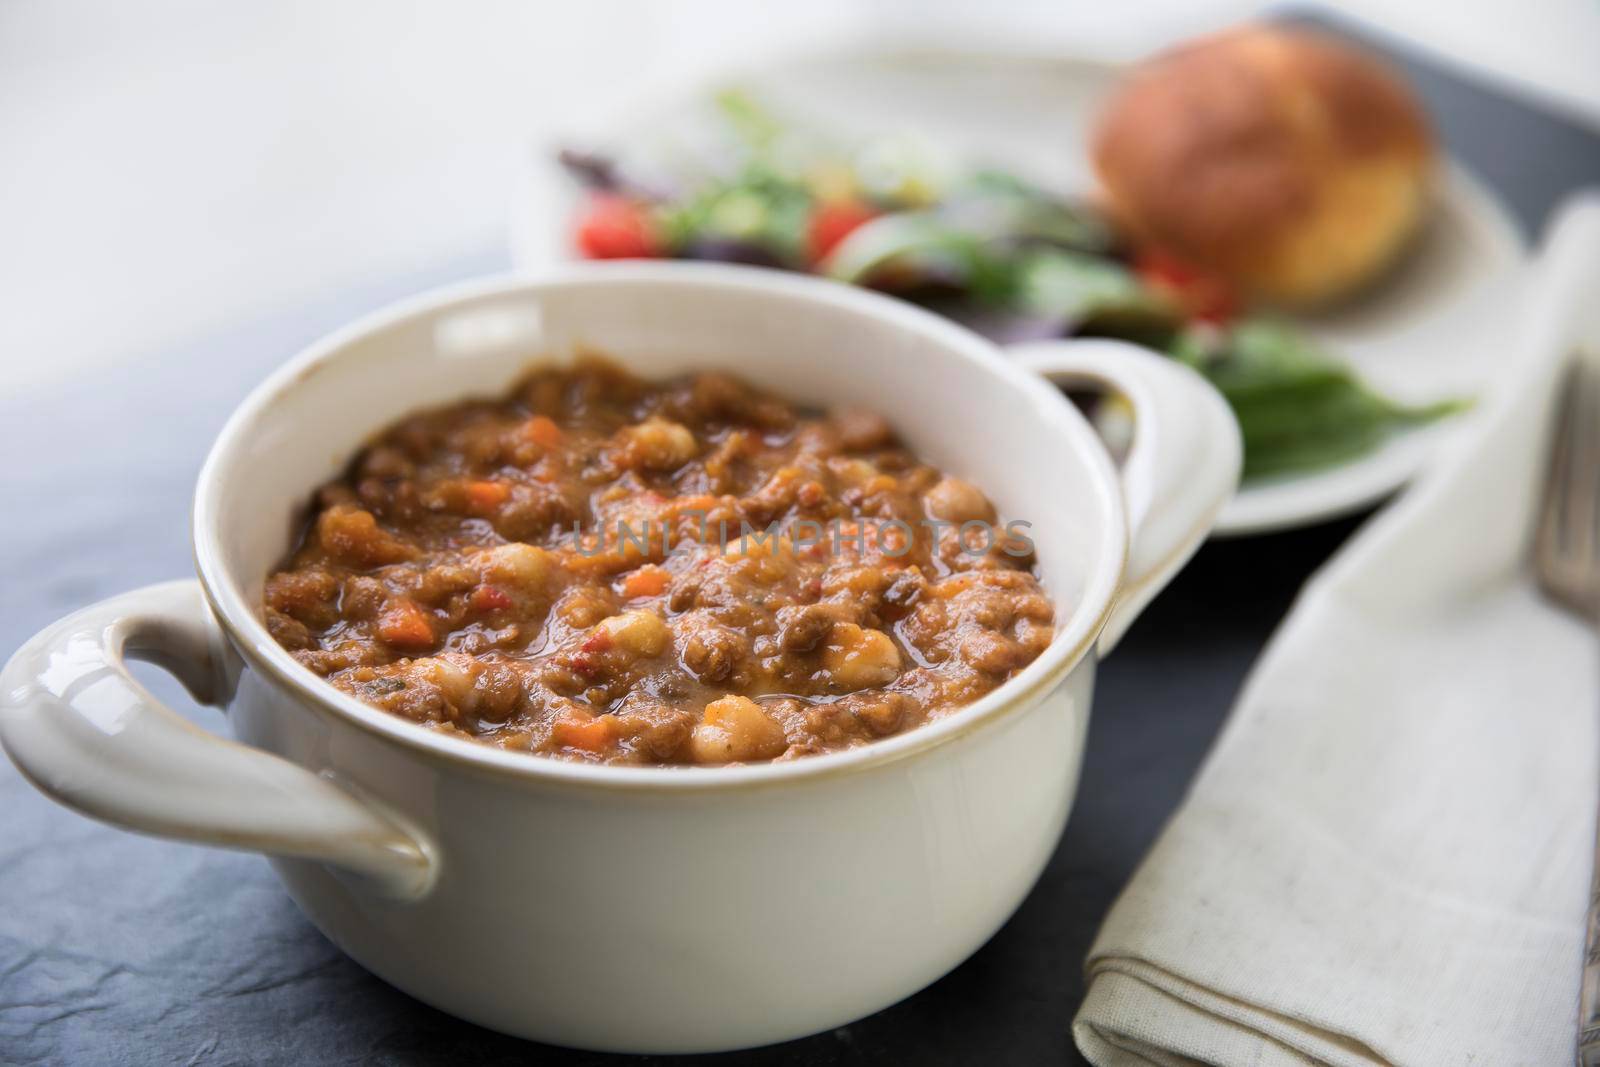 Delicious and healthy vegan Moroccan stew with chick peas and carrots.